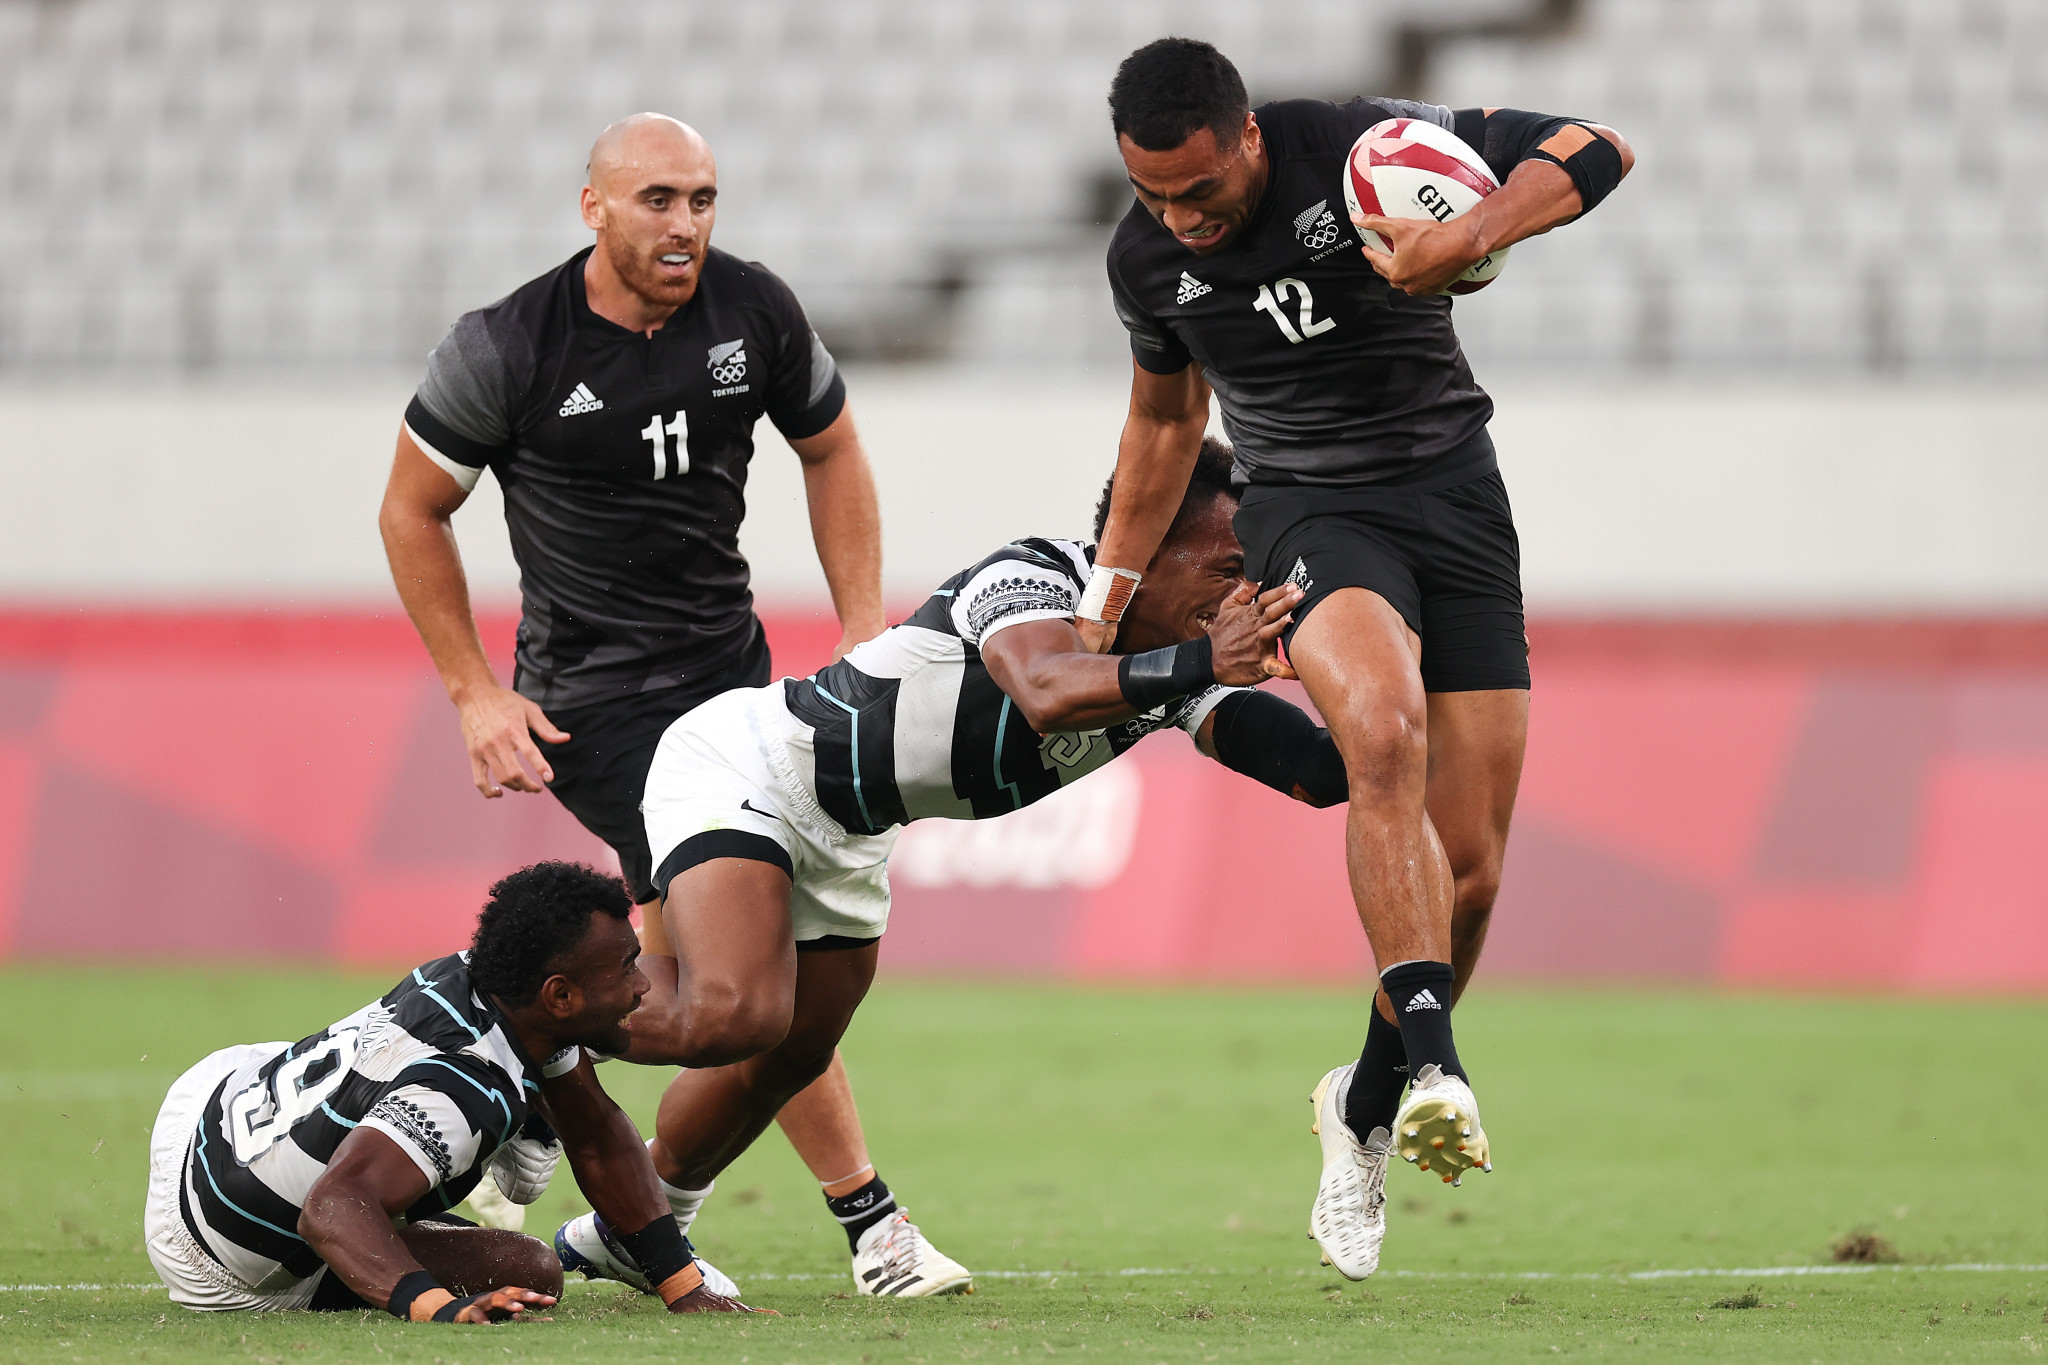 New Zealand to make long-awaited World Rugby Sevens Series return in Singapore